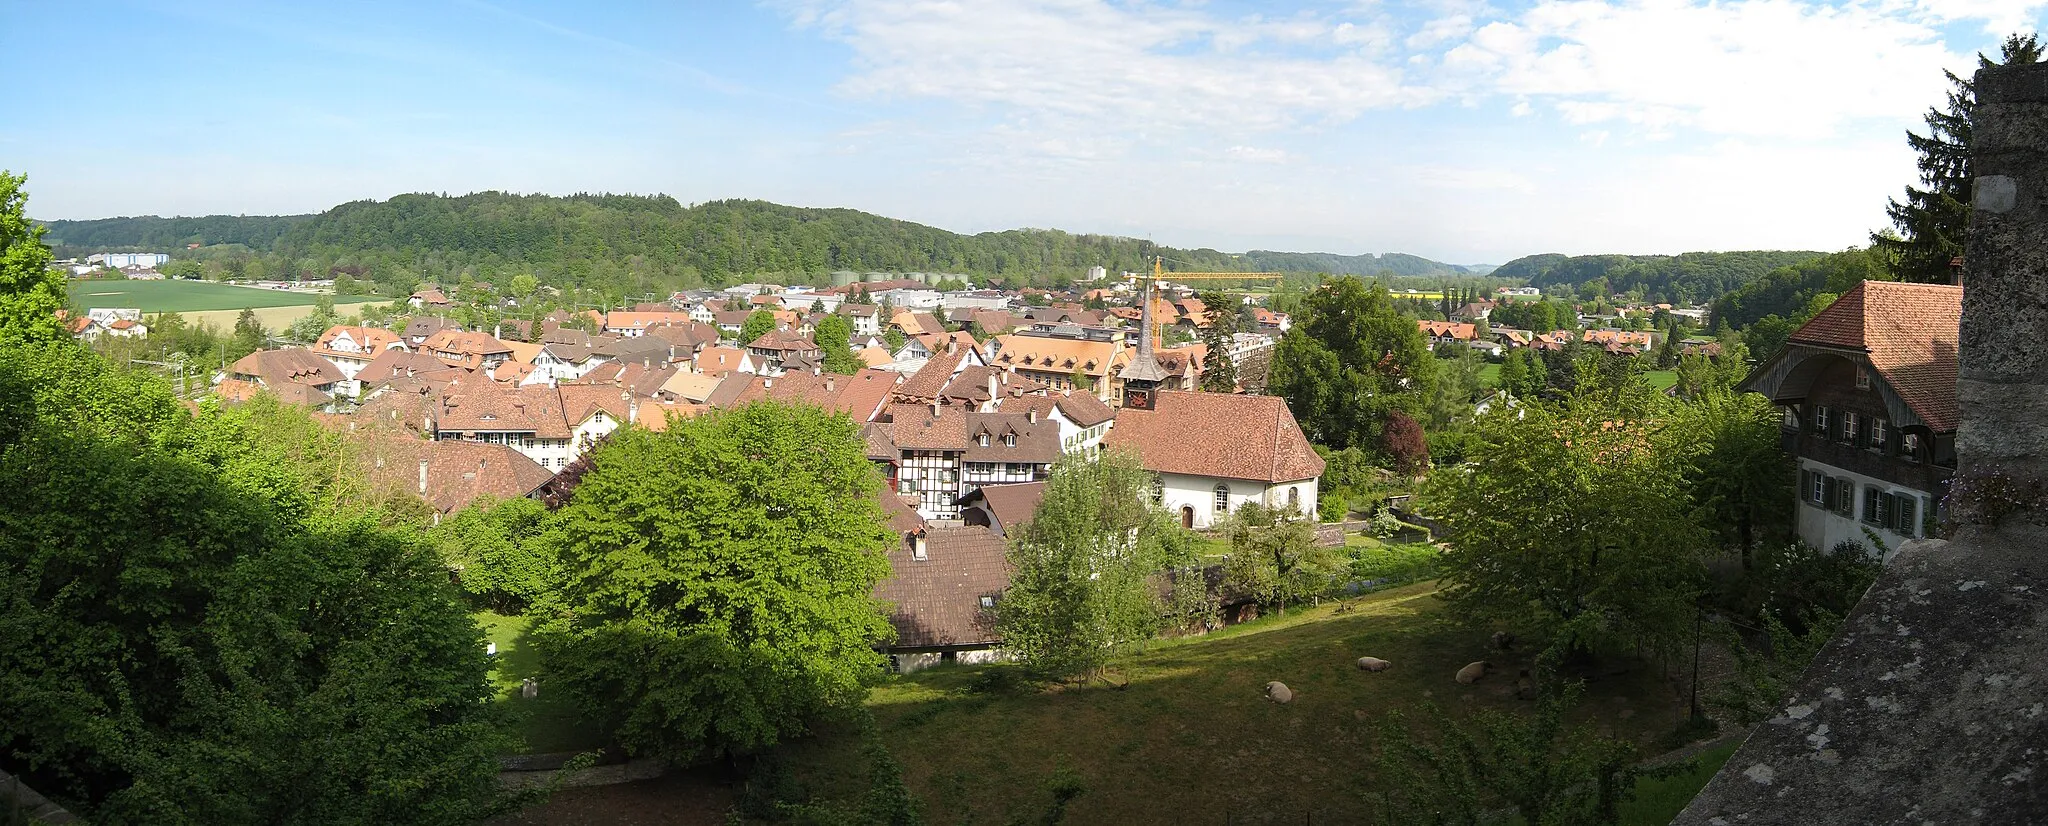 Photo showing: Panoramic view of Laupen, Canton of Berne, Switzerland.